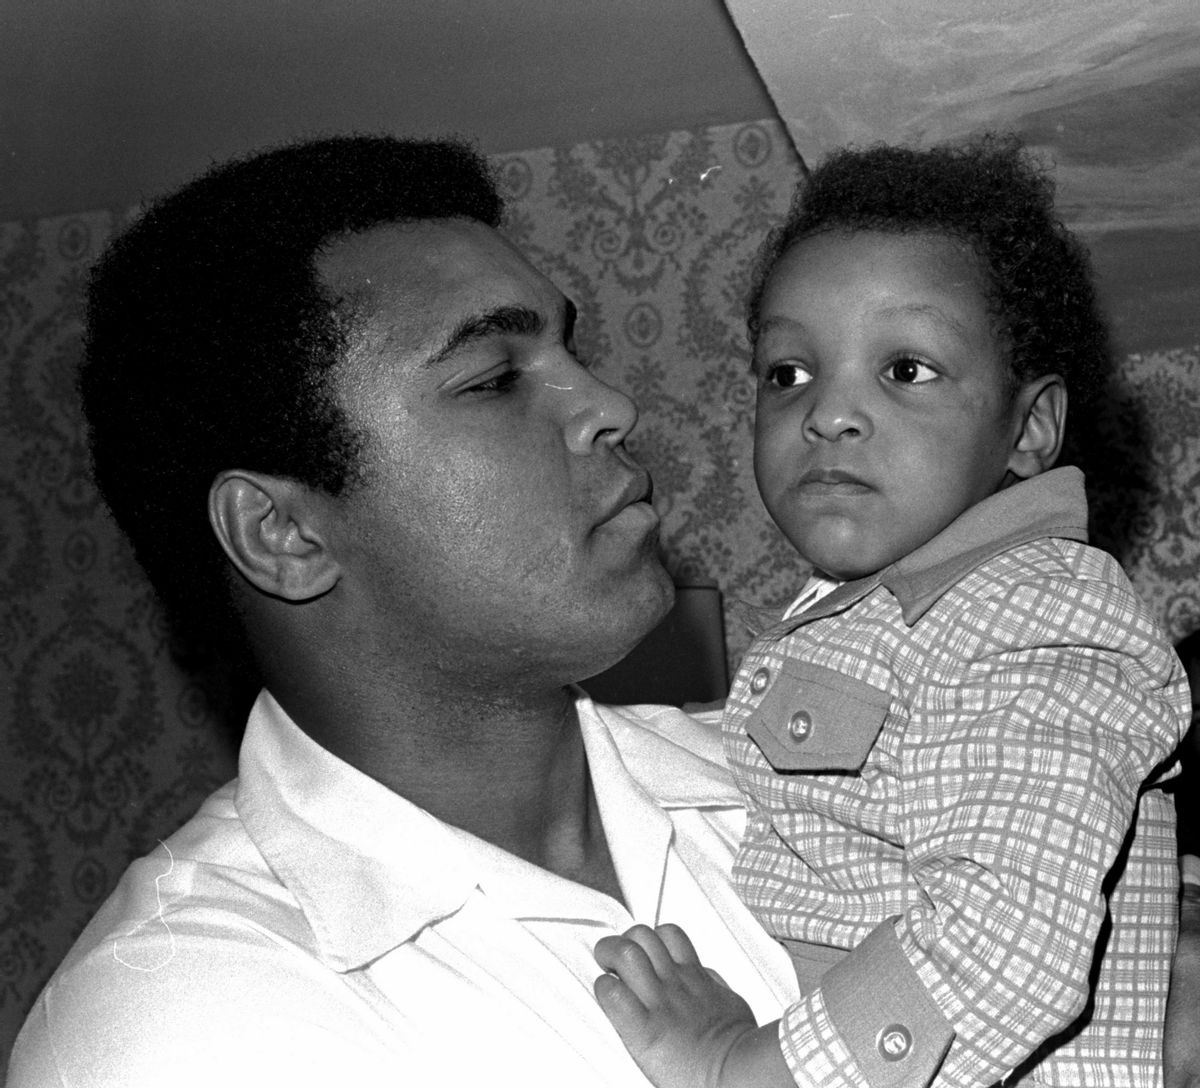 Heavyweight boxing champion Muhammad Ali, and Little Muhammad Ali, his 2 1/2 year old son, arrive at Miami Beach, Fla.   (Associated Press)